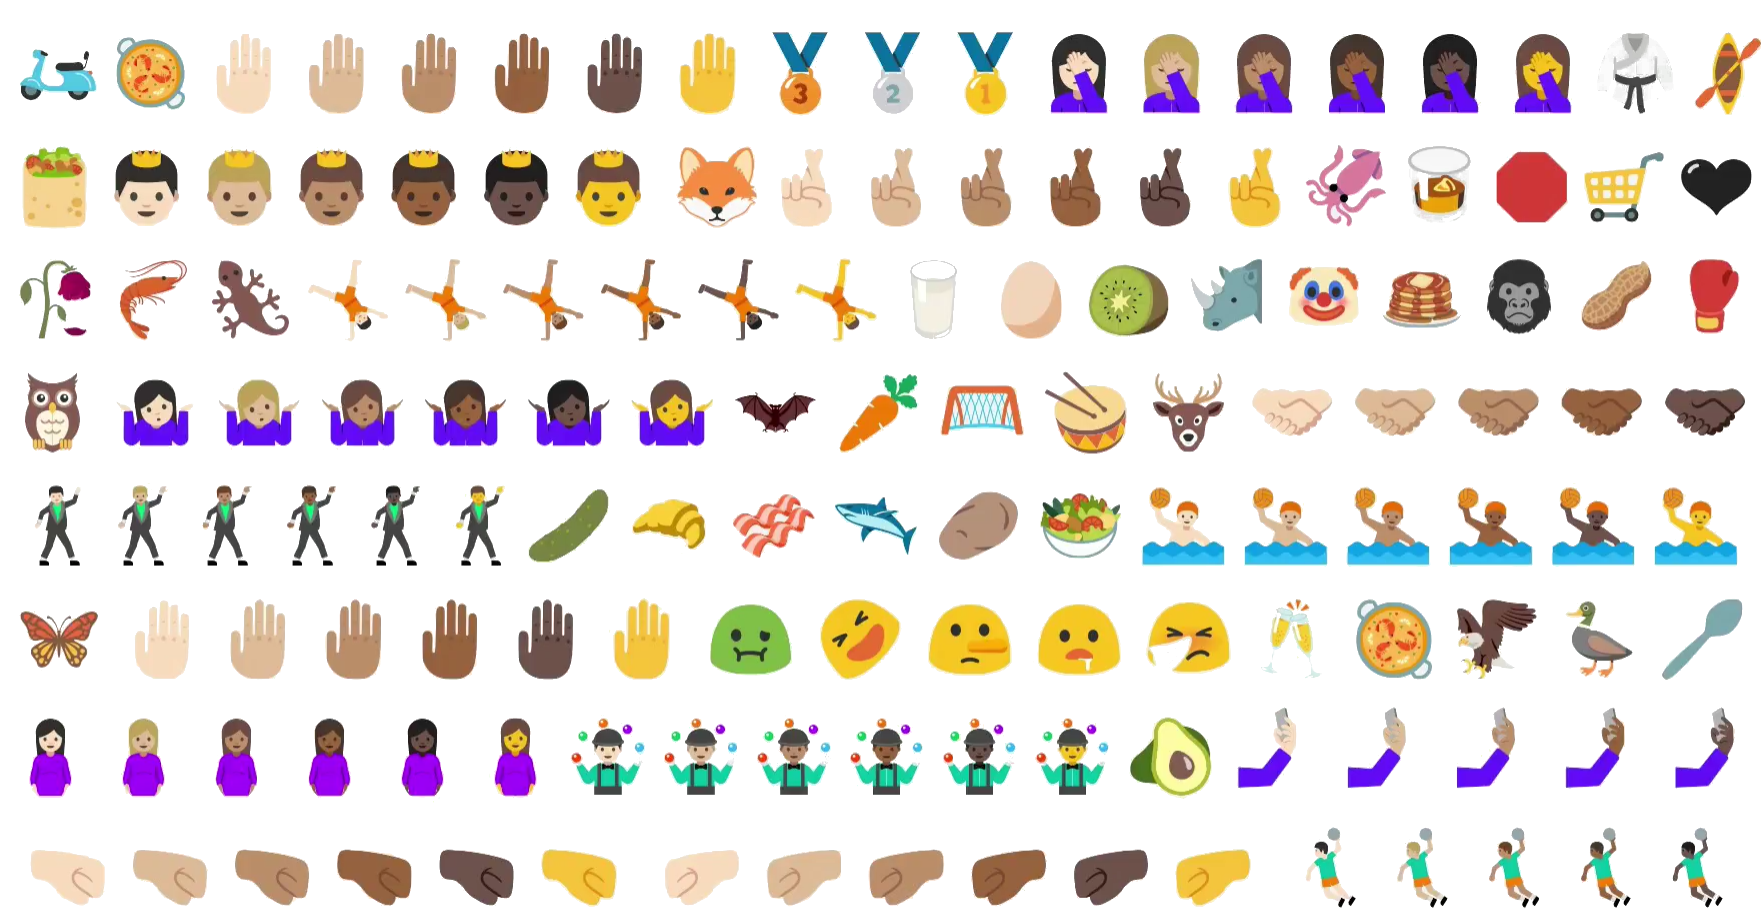 Android N will be the first OS to support Unicode 9, more than 72 new emojis to arrive